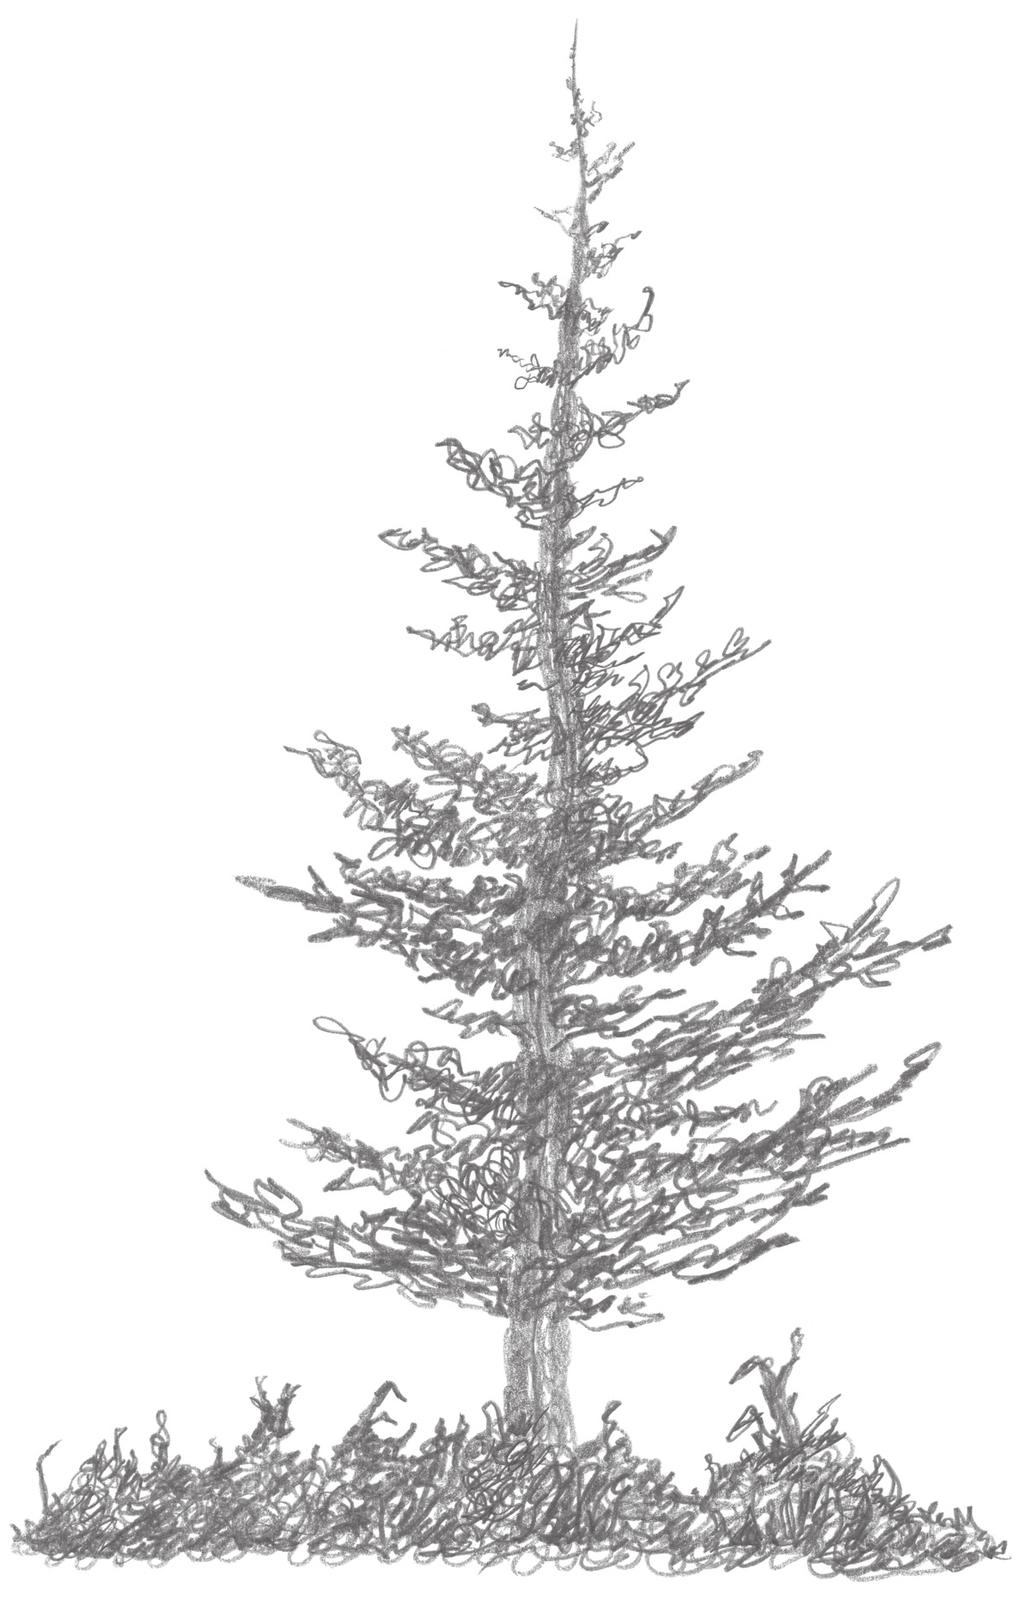 6 Figure 13 Challenge! Examine your drawing and imagine your tree growing in a fi eld.